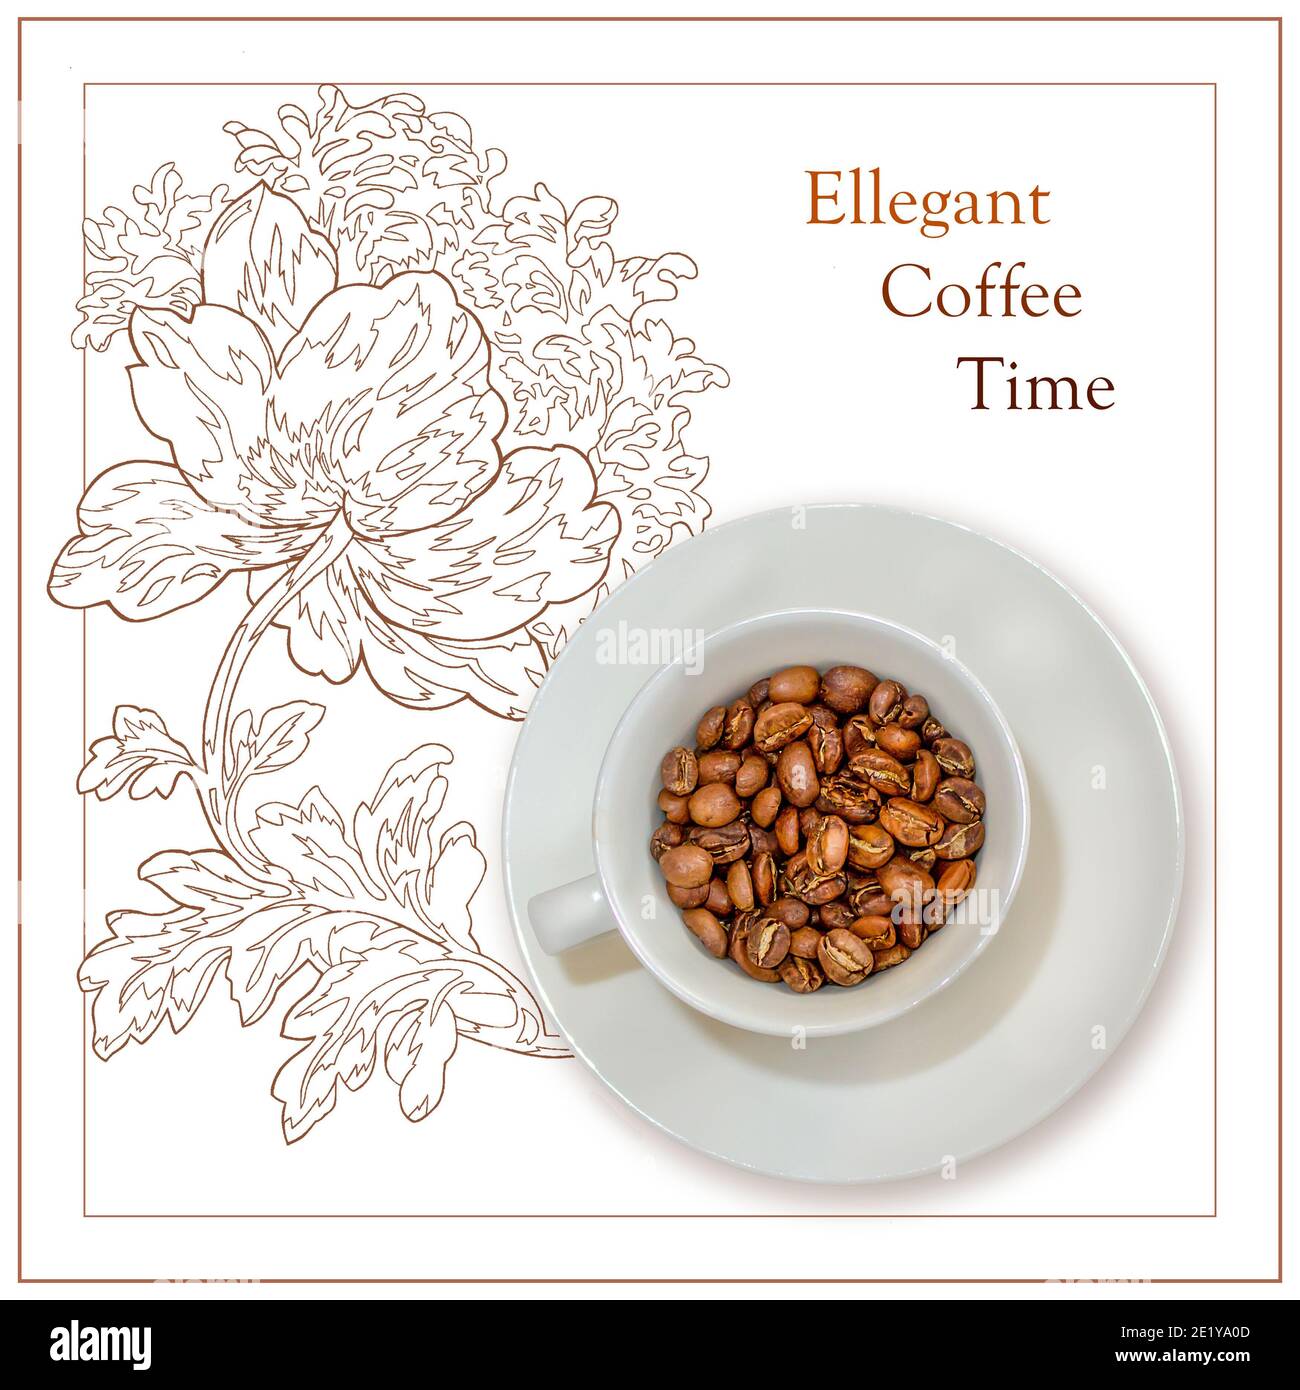 Coffee cup with roasted arabica beans on a white background with a linearly drawn stylized retro flower and an inscription. Poster-elegant coffee time Stock Photo